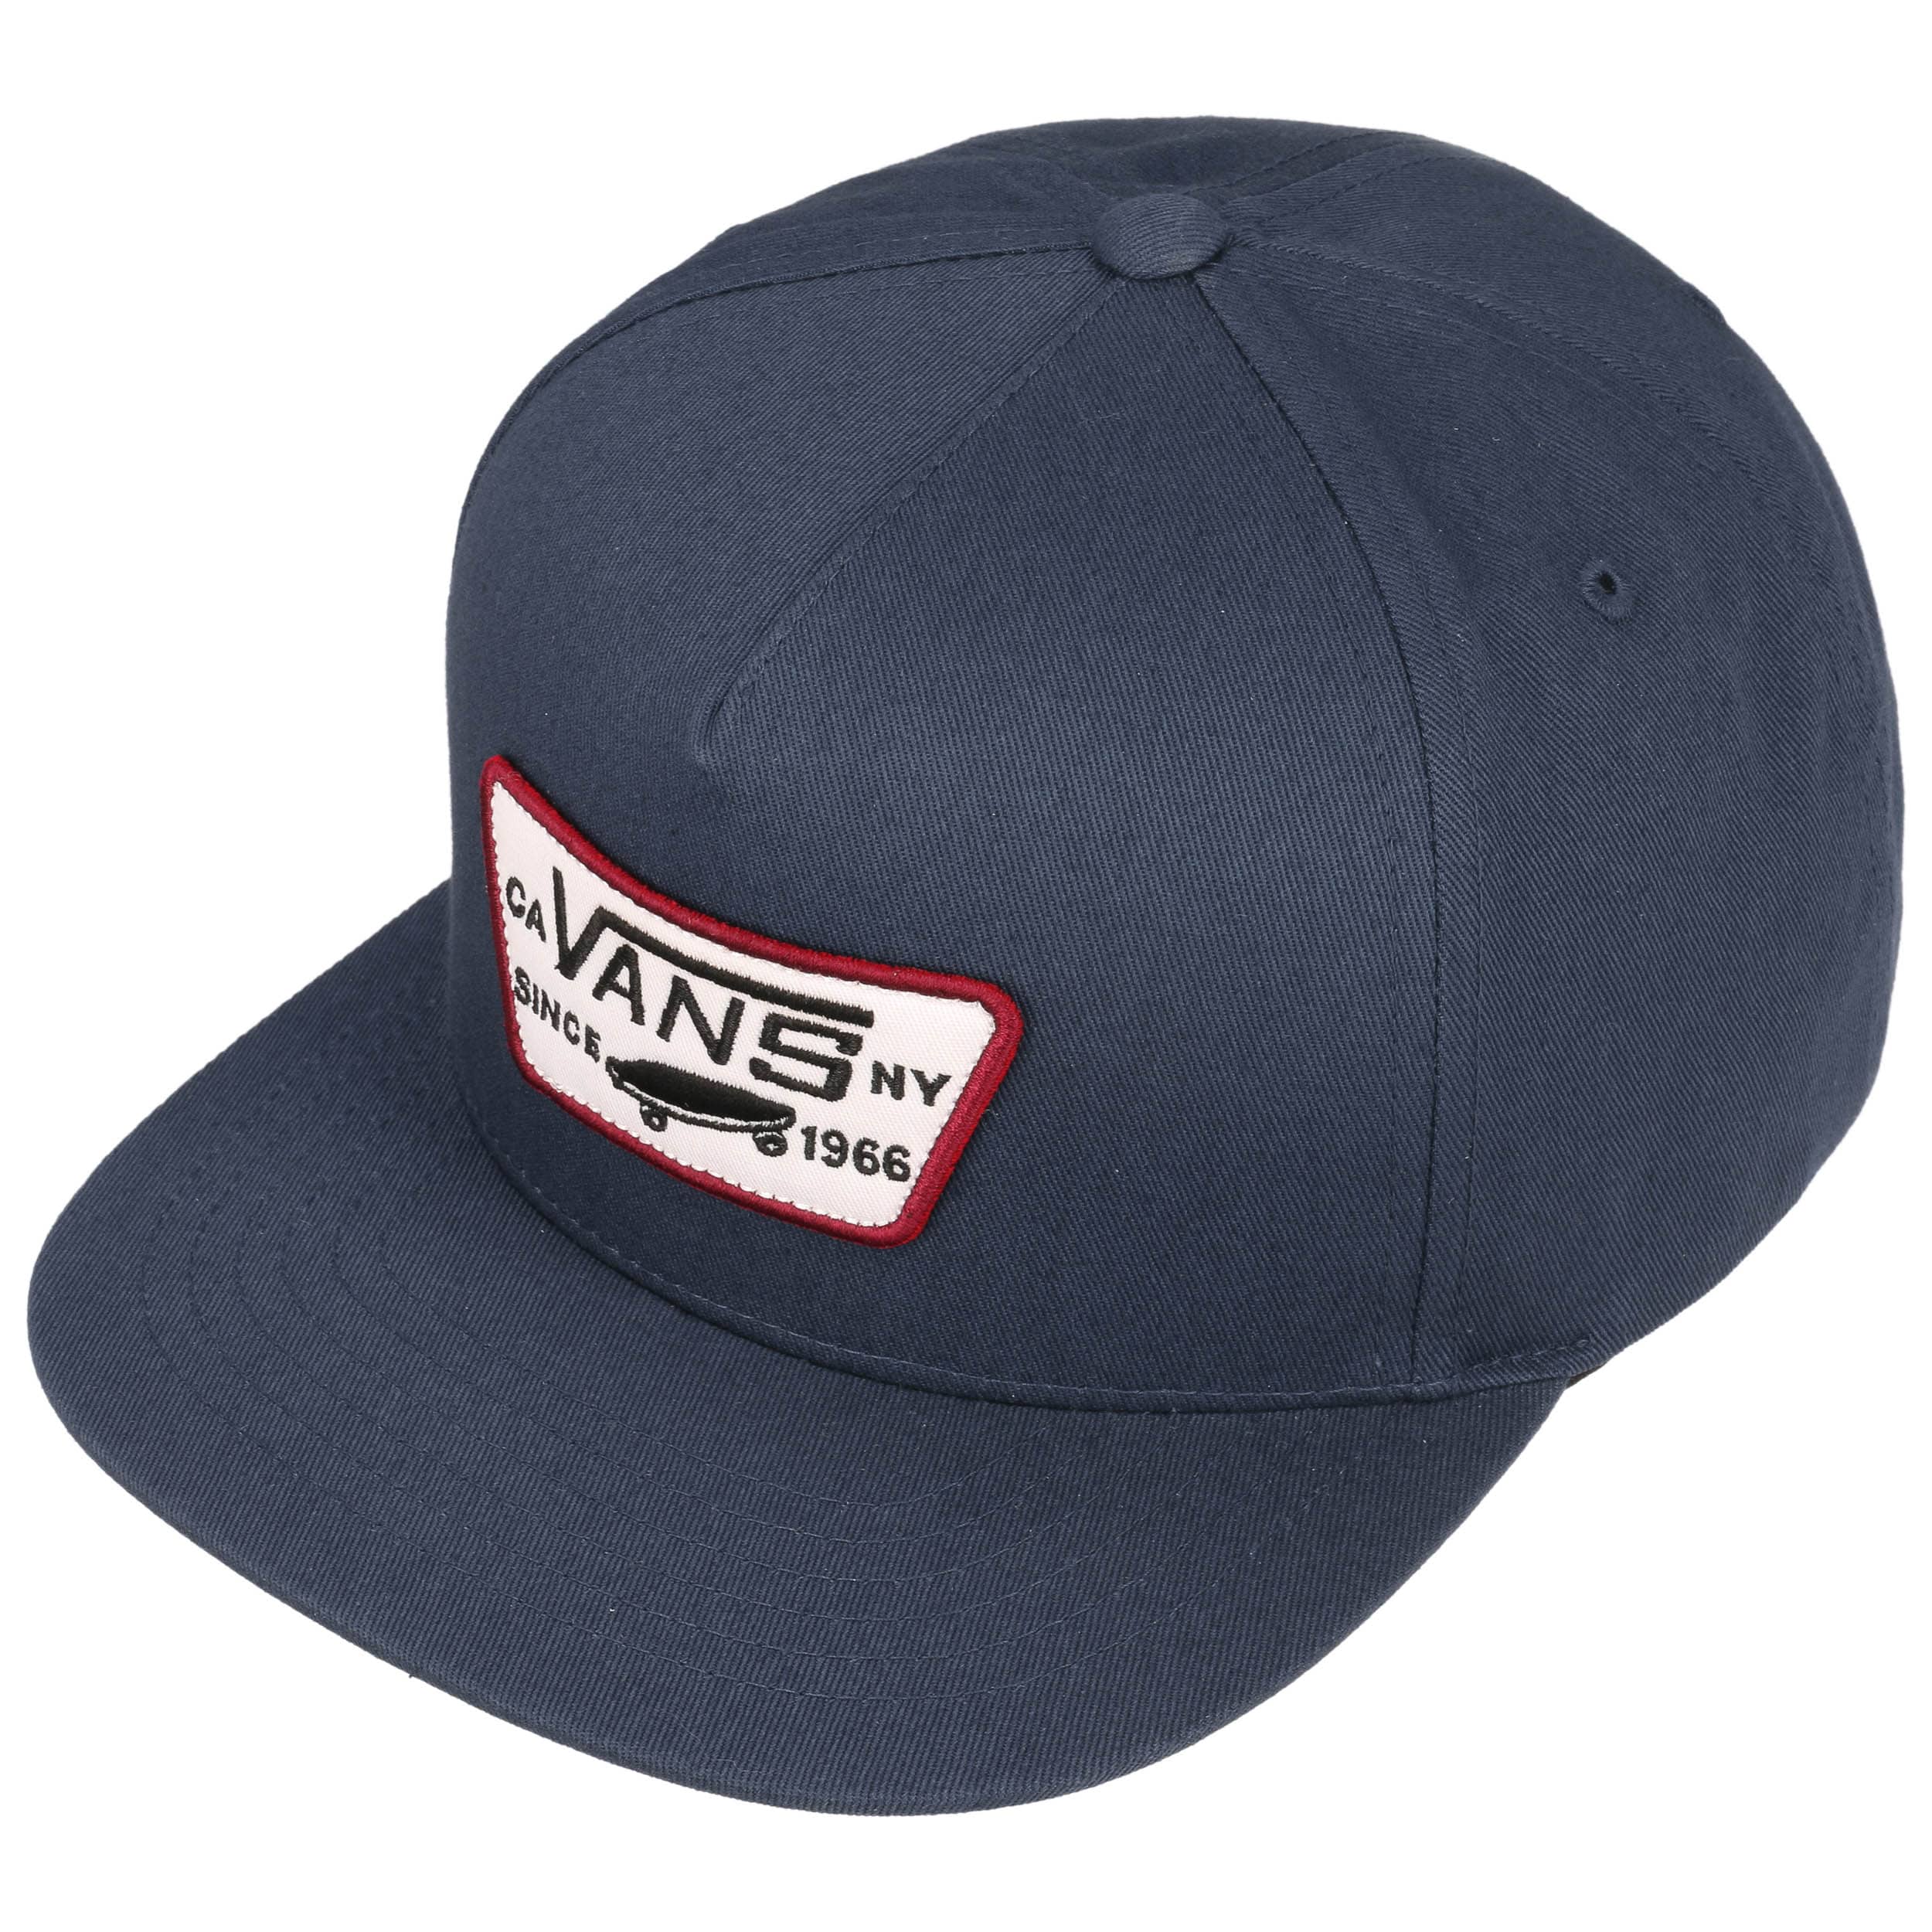 Casquette Full Patch Snapback by Vans